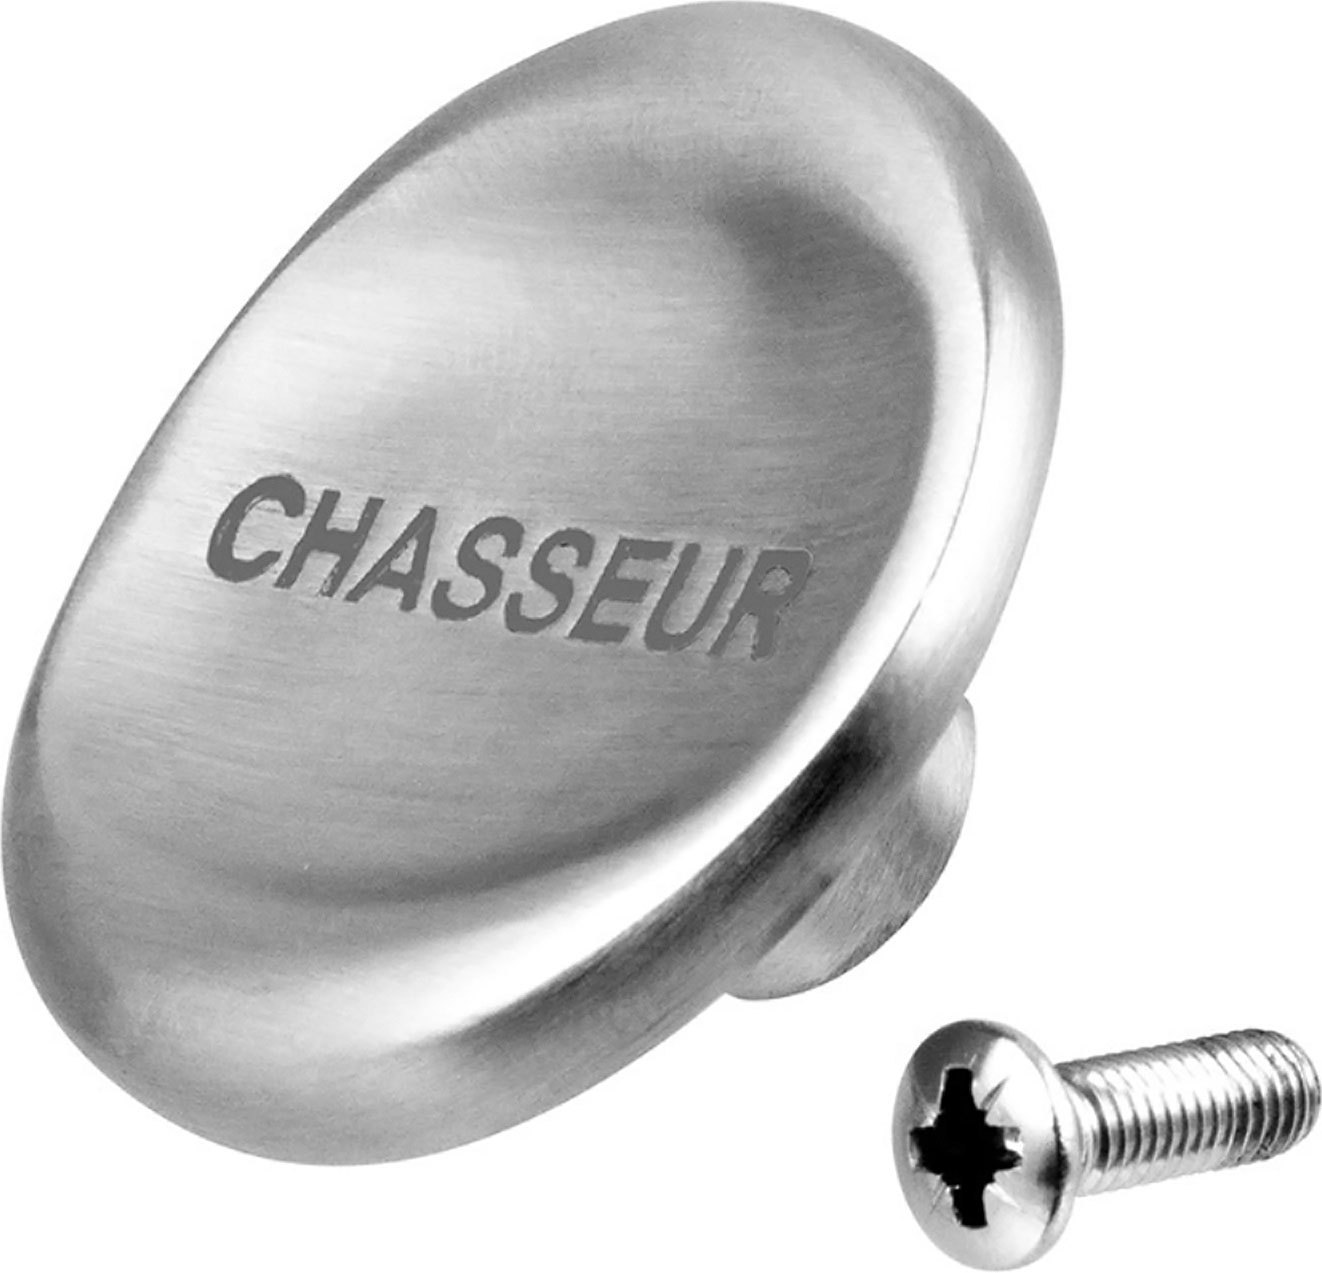 Chasseur Stainless Steel Knob + Screw Replacement for Cast Iron French Oven